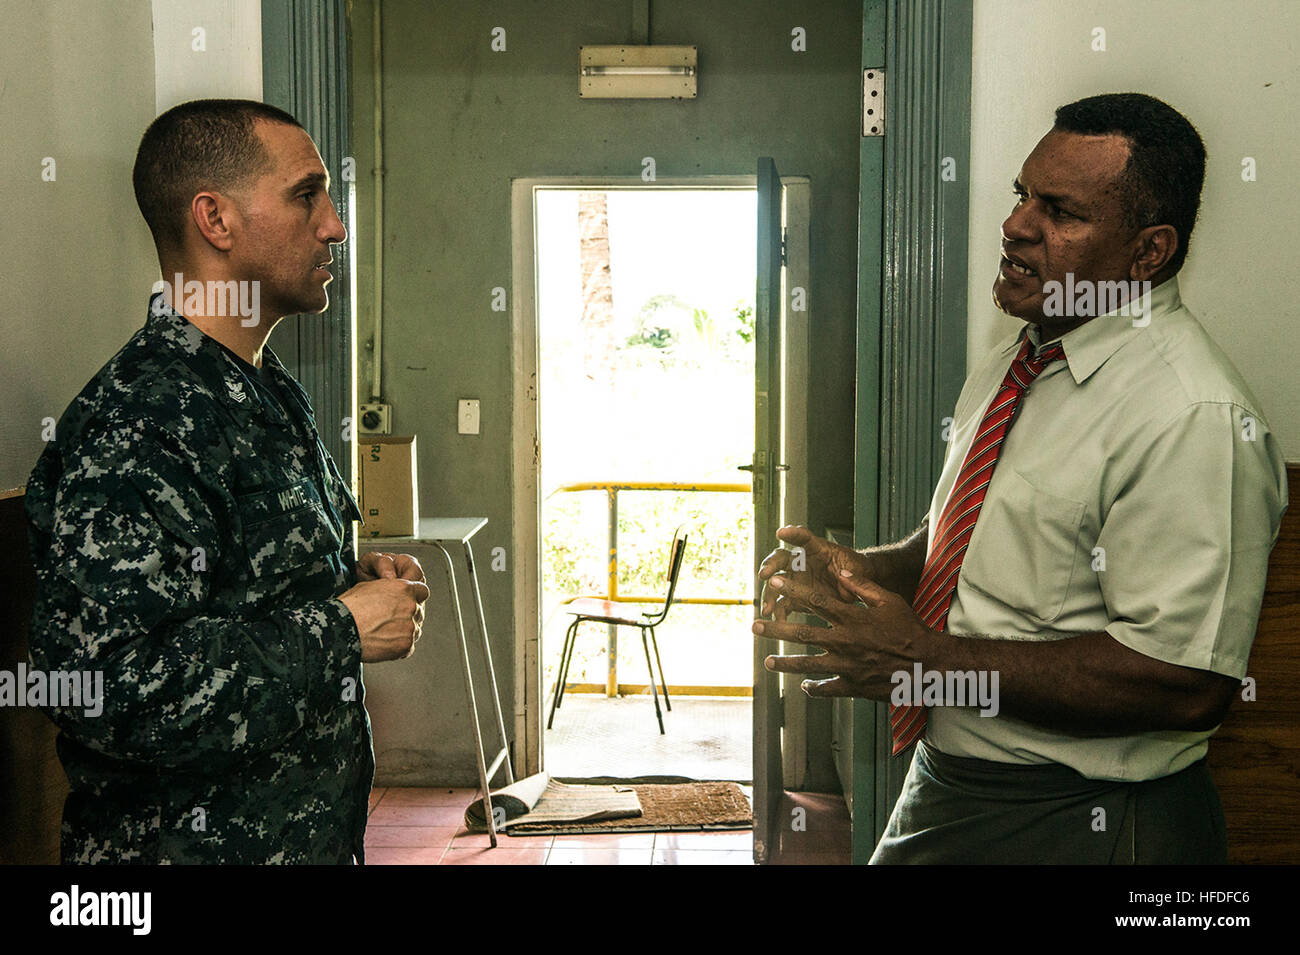 SUVA, Fiji (June 8, 2015) Hospital Corpsman 1st Class Nathan White discusses how to maintain medical equipment with a Republic of Fiji military forces biological technician during Pacific Partnership 2015. The hospital ship USNS Mercy (T-AH 19) is currently in Suva, Fiji, for its first mission port of PP15. Pacific Partnership is in its 10th iteration and is the largest annual multilateral humanitarian assistance and disaster relief preparedness mission conducted in the Indo-Asia-Pacific region. While training for crisis conditions, Pacific Partnership missions to date have provided real world Stock Photo